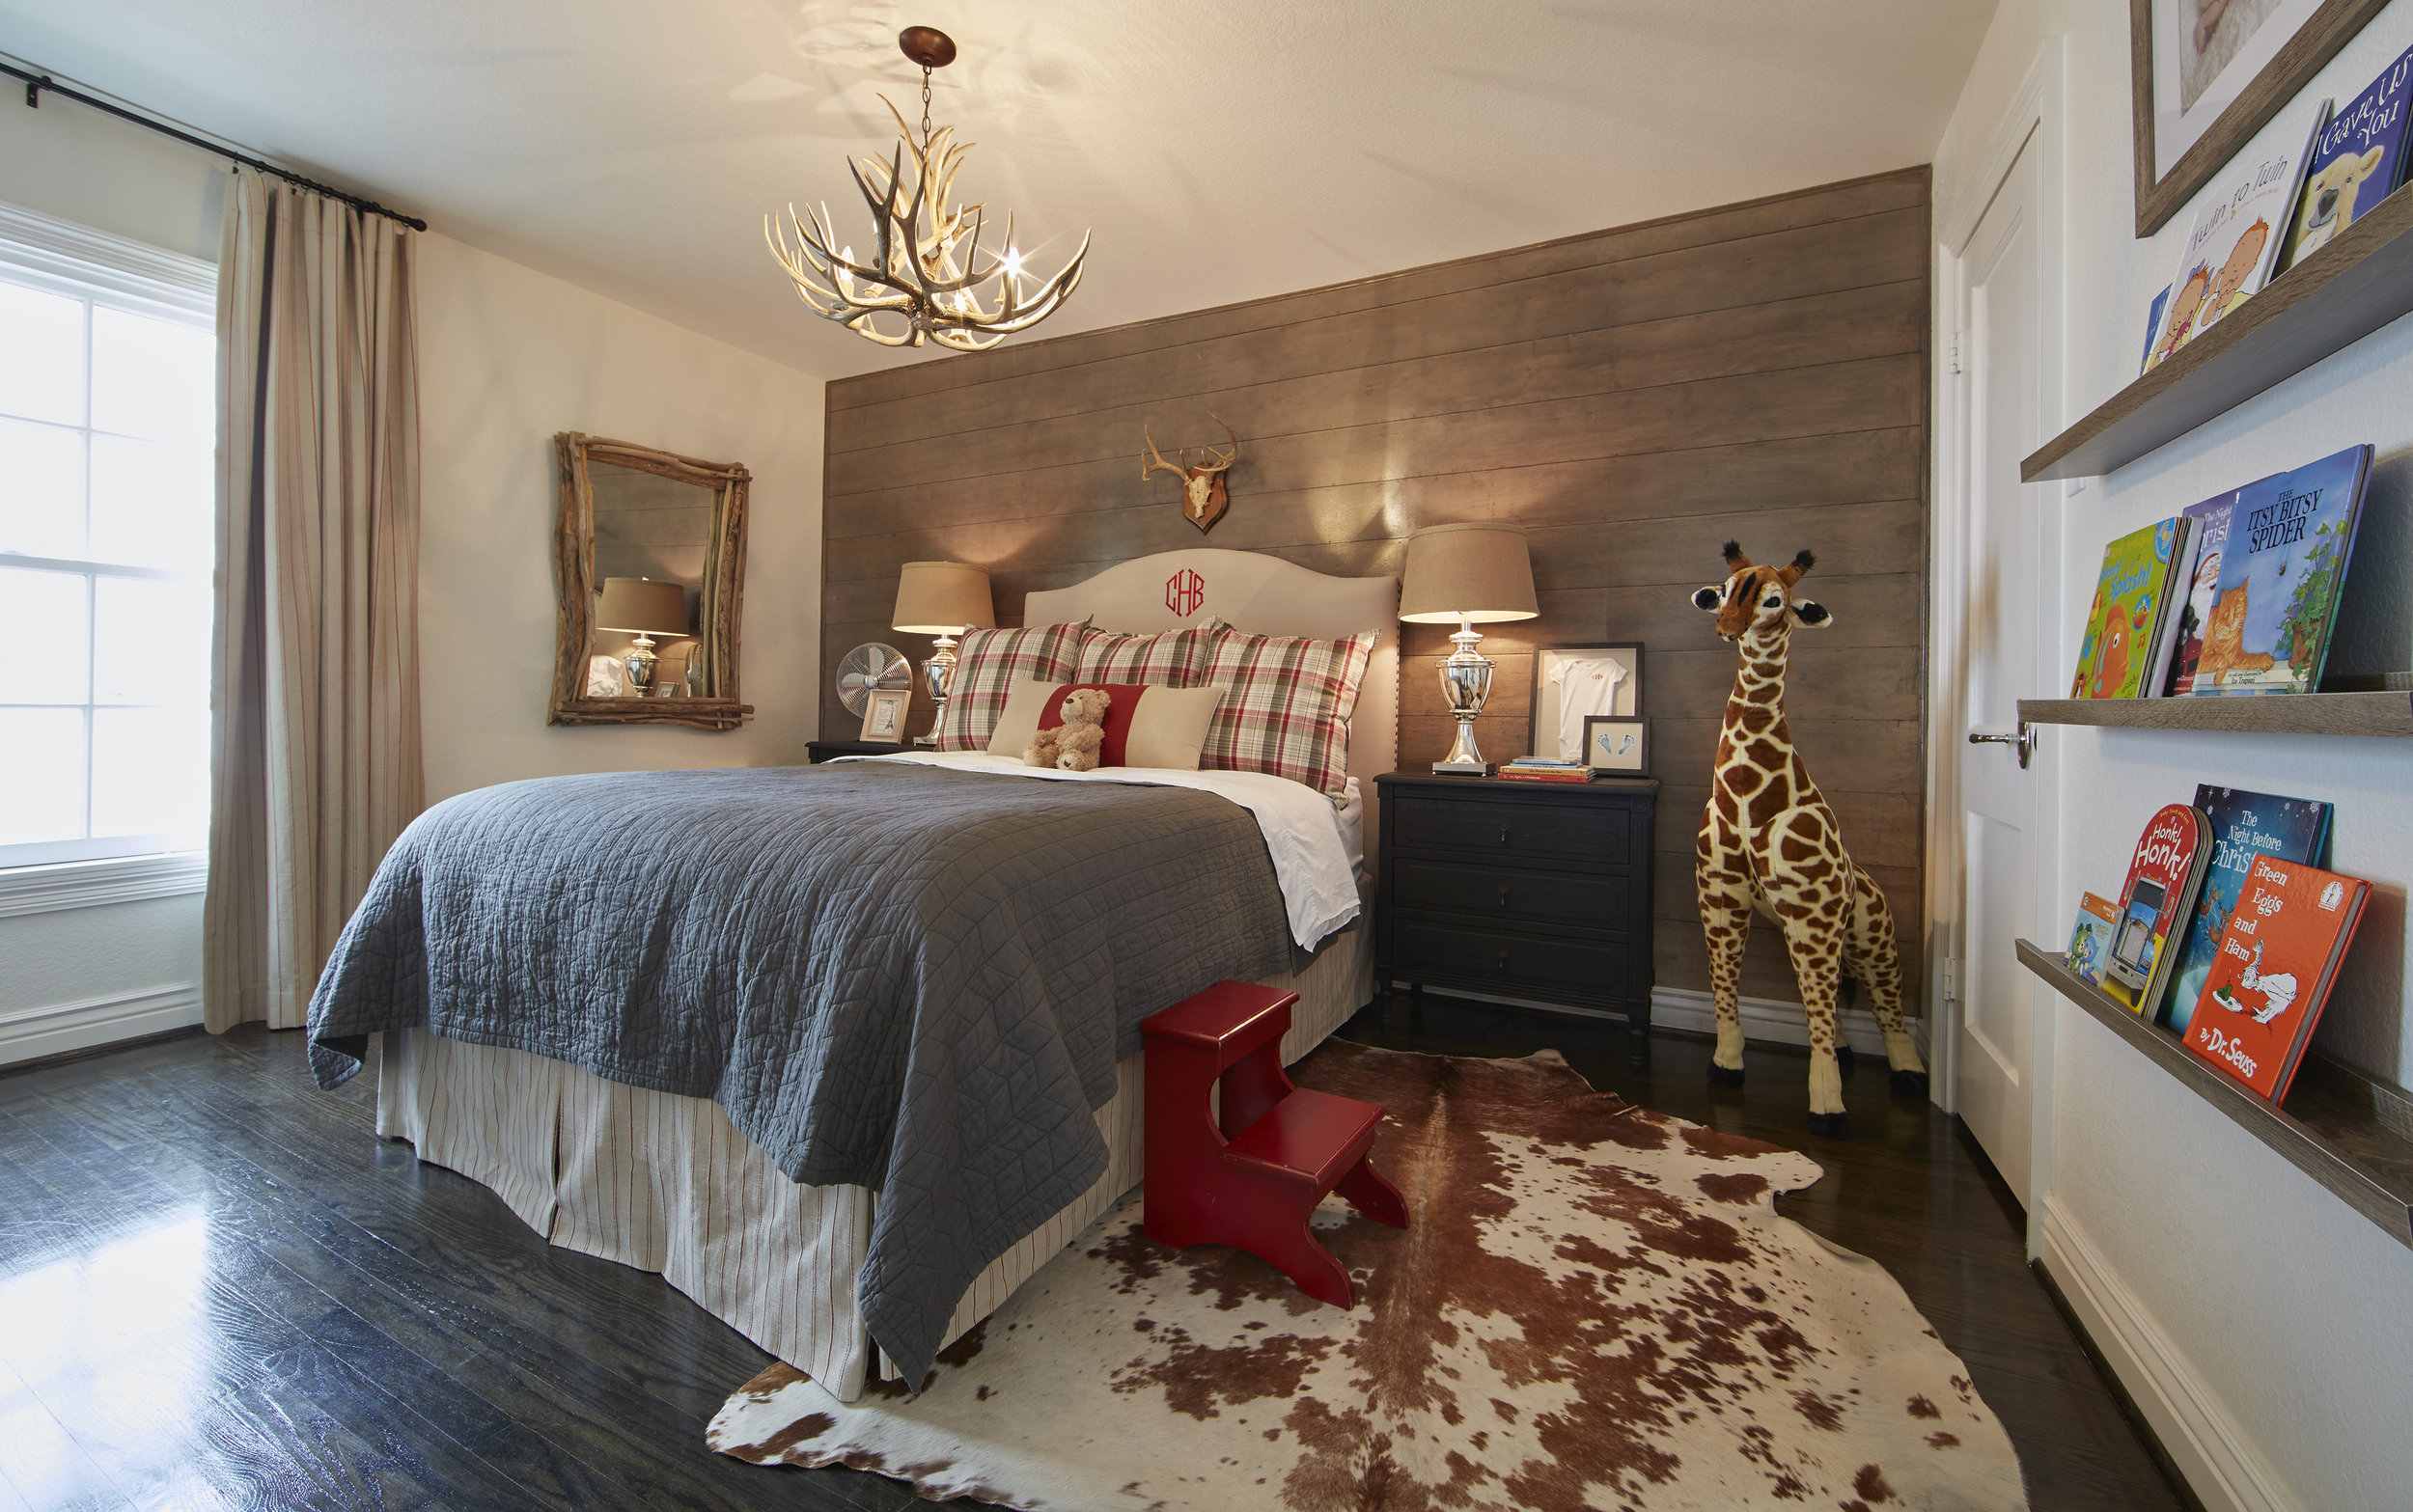 Son Beckham’s room features a more rustic take on farmhouse styling with its stained shiplap wall, antler chandelier and cowhide rug. Emily chose red accents to reflect his fiery personality.